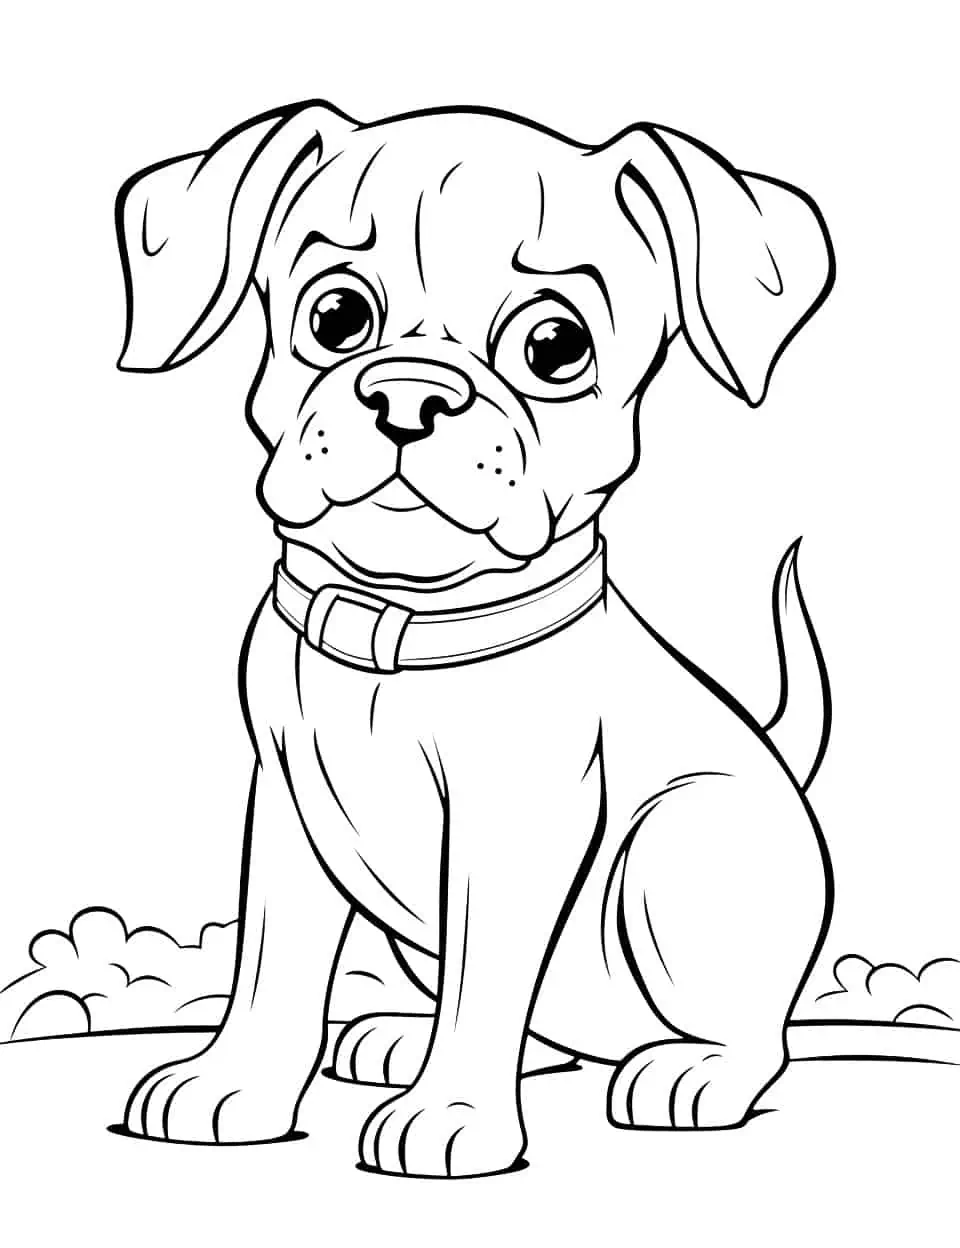 Big Ears Boxer Dog Coloring Page - A funny coloring page of a Boxer dog sitting outdoors wearing a collar.